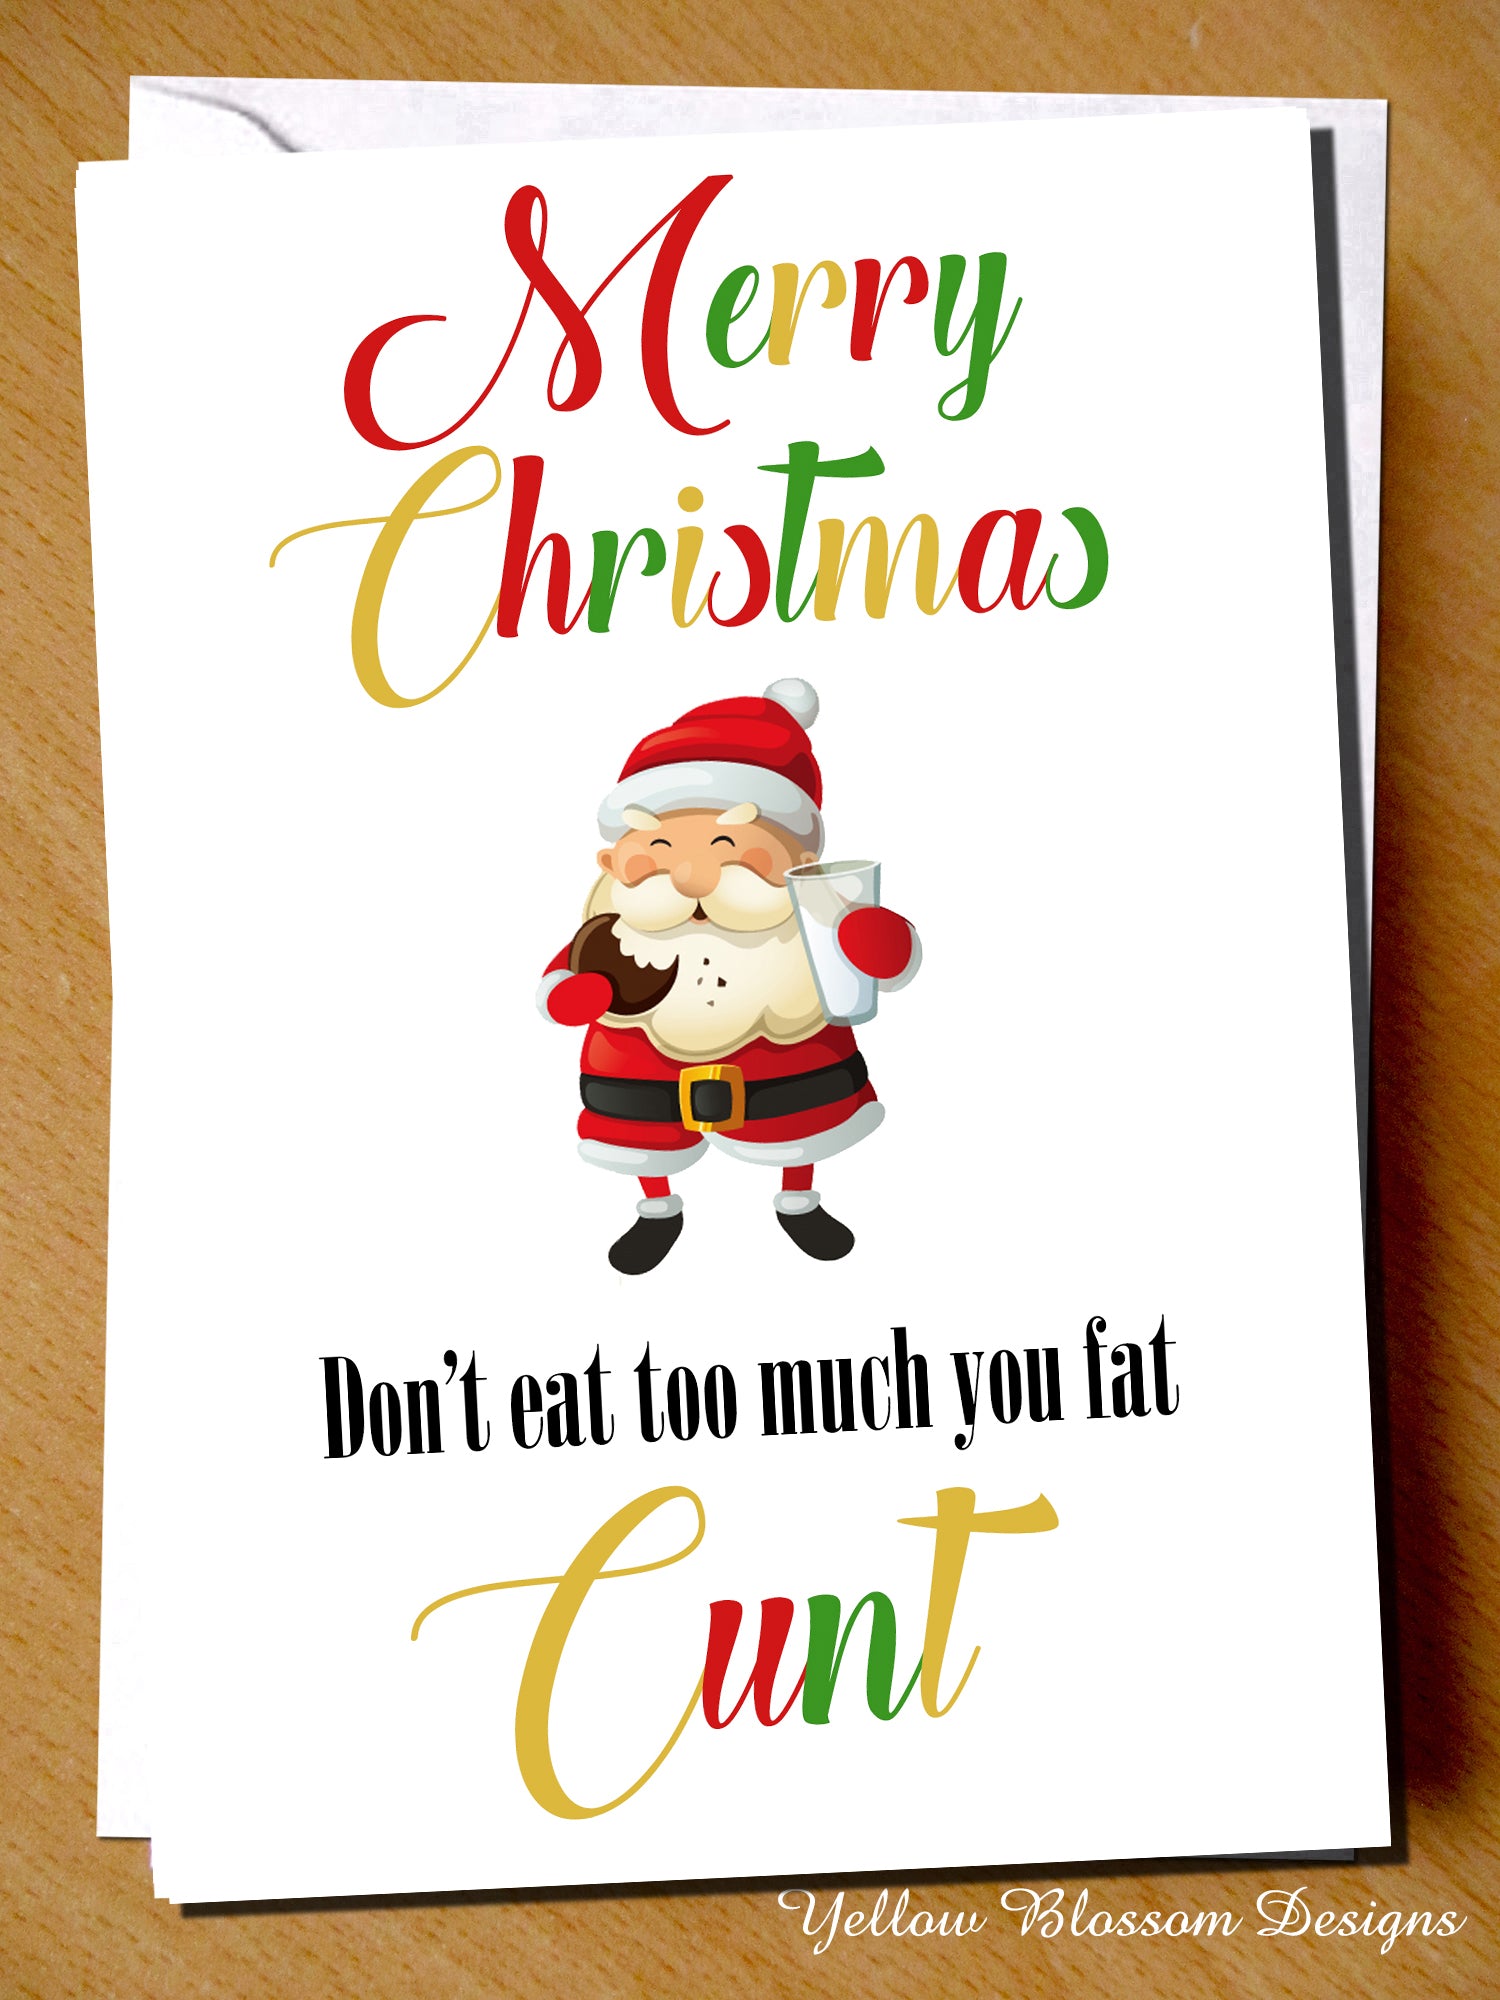 Merry Christmas Don't Eat Too Much You Fat Cunt – YellowBlossomDesignsLtd